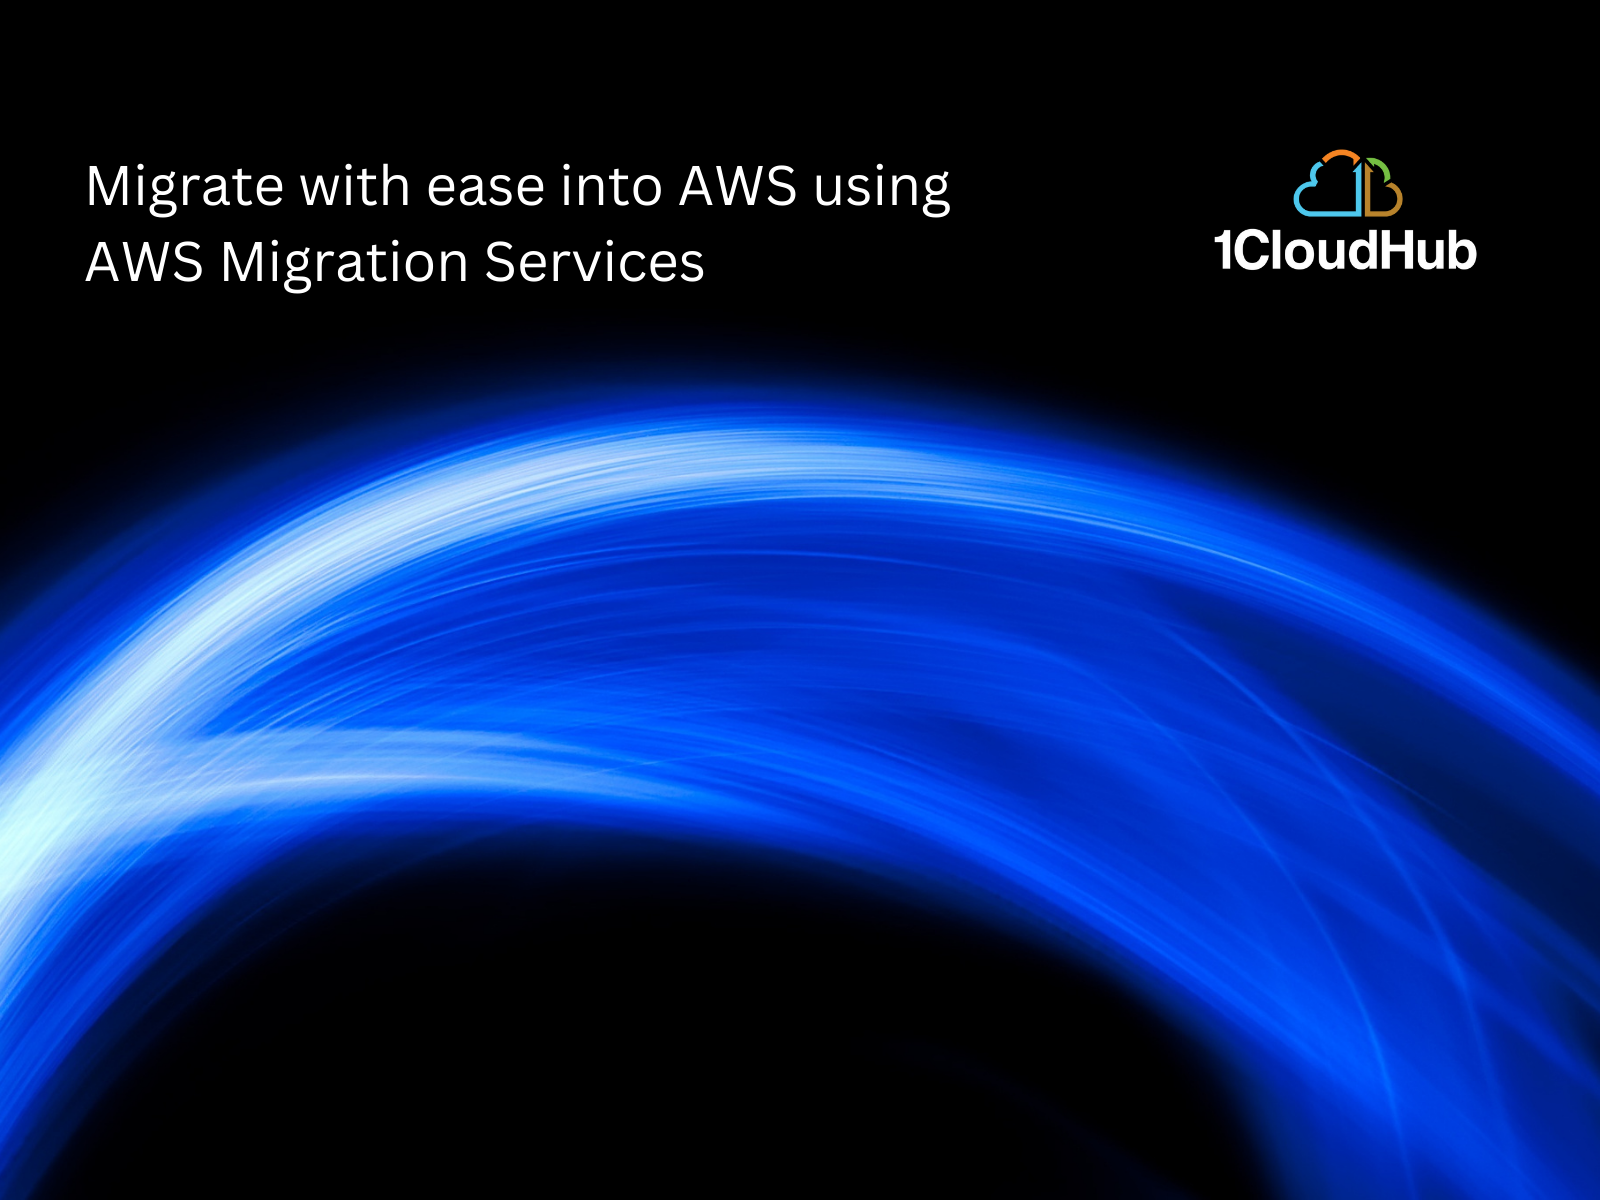 Migrate with ease into AWS using AWS Migration Services